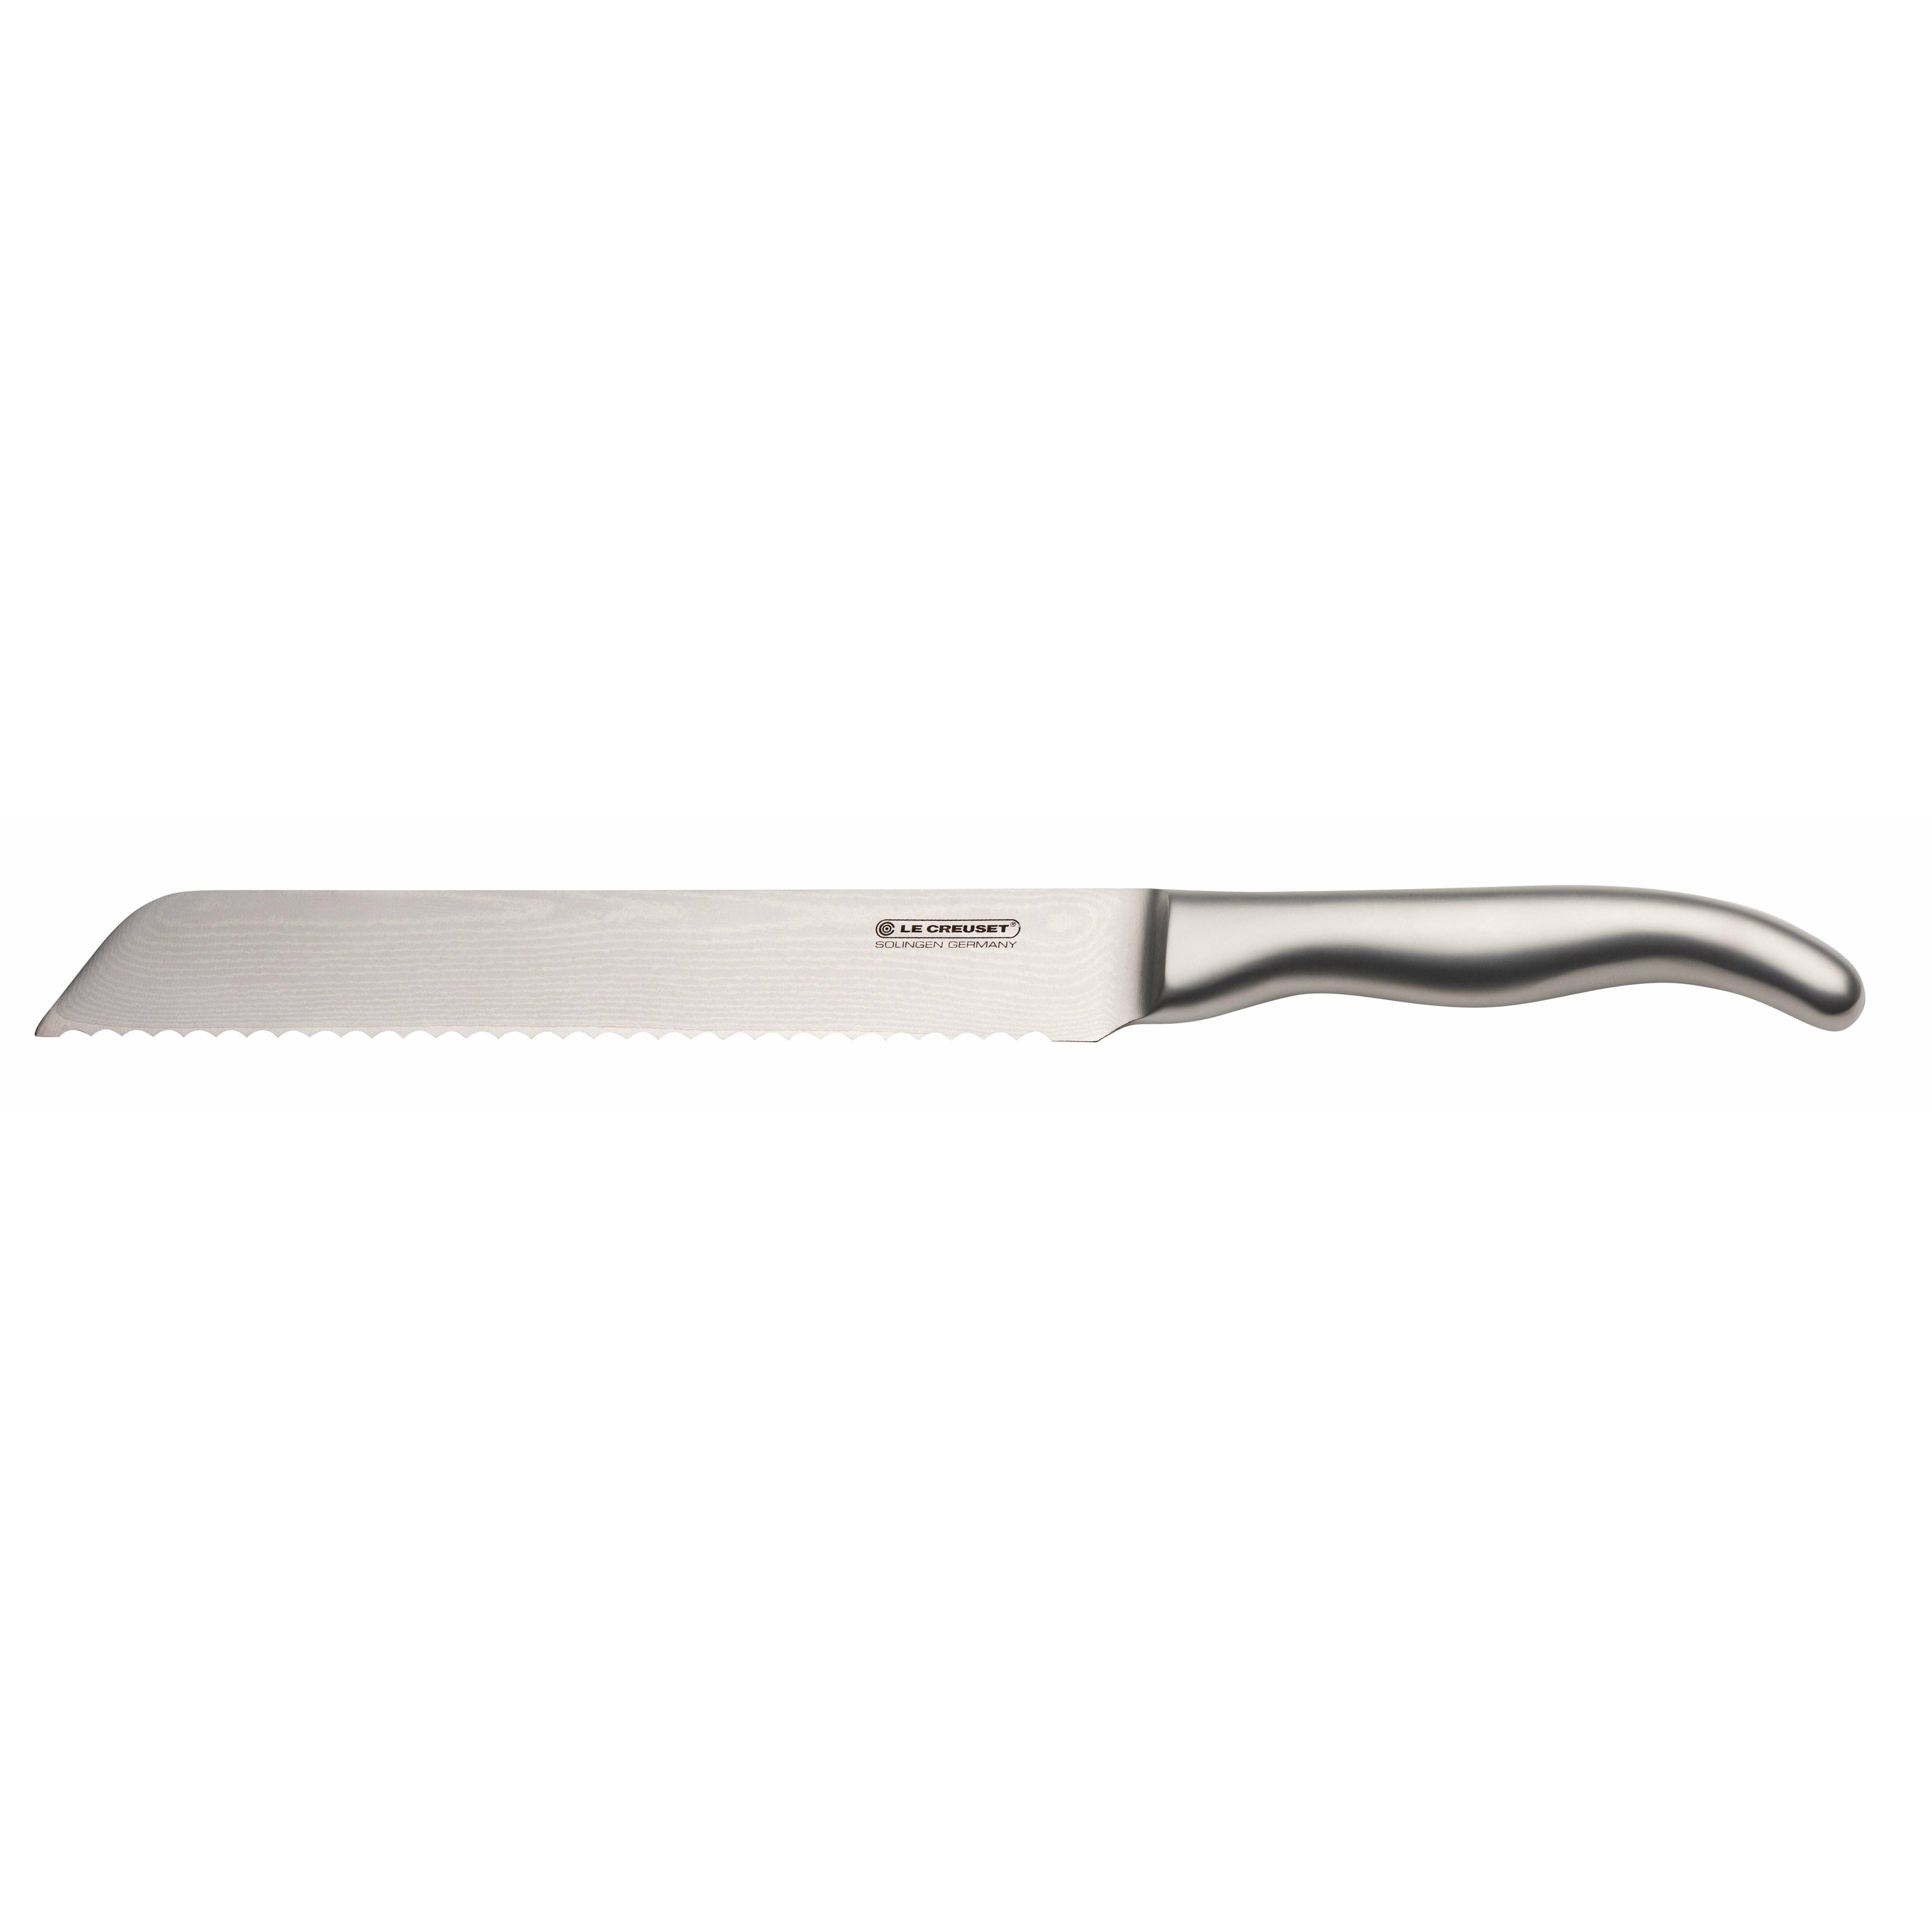 Le Creuset Bread Knife Stainless Steel Handle, 20 Cm